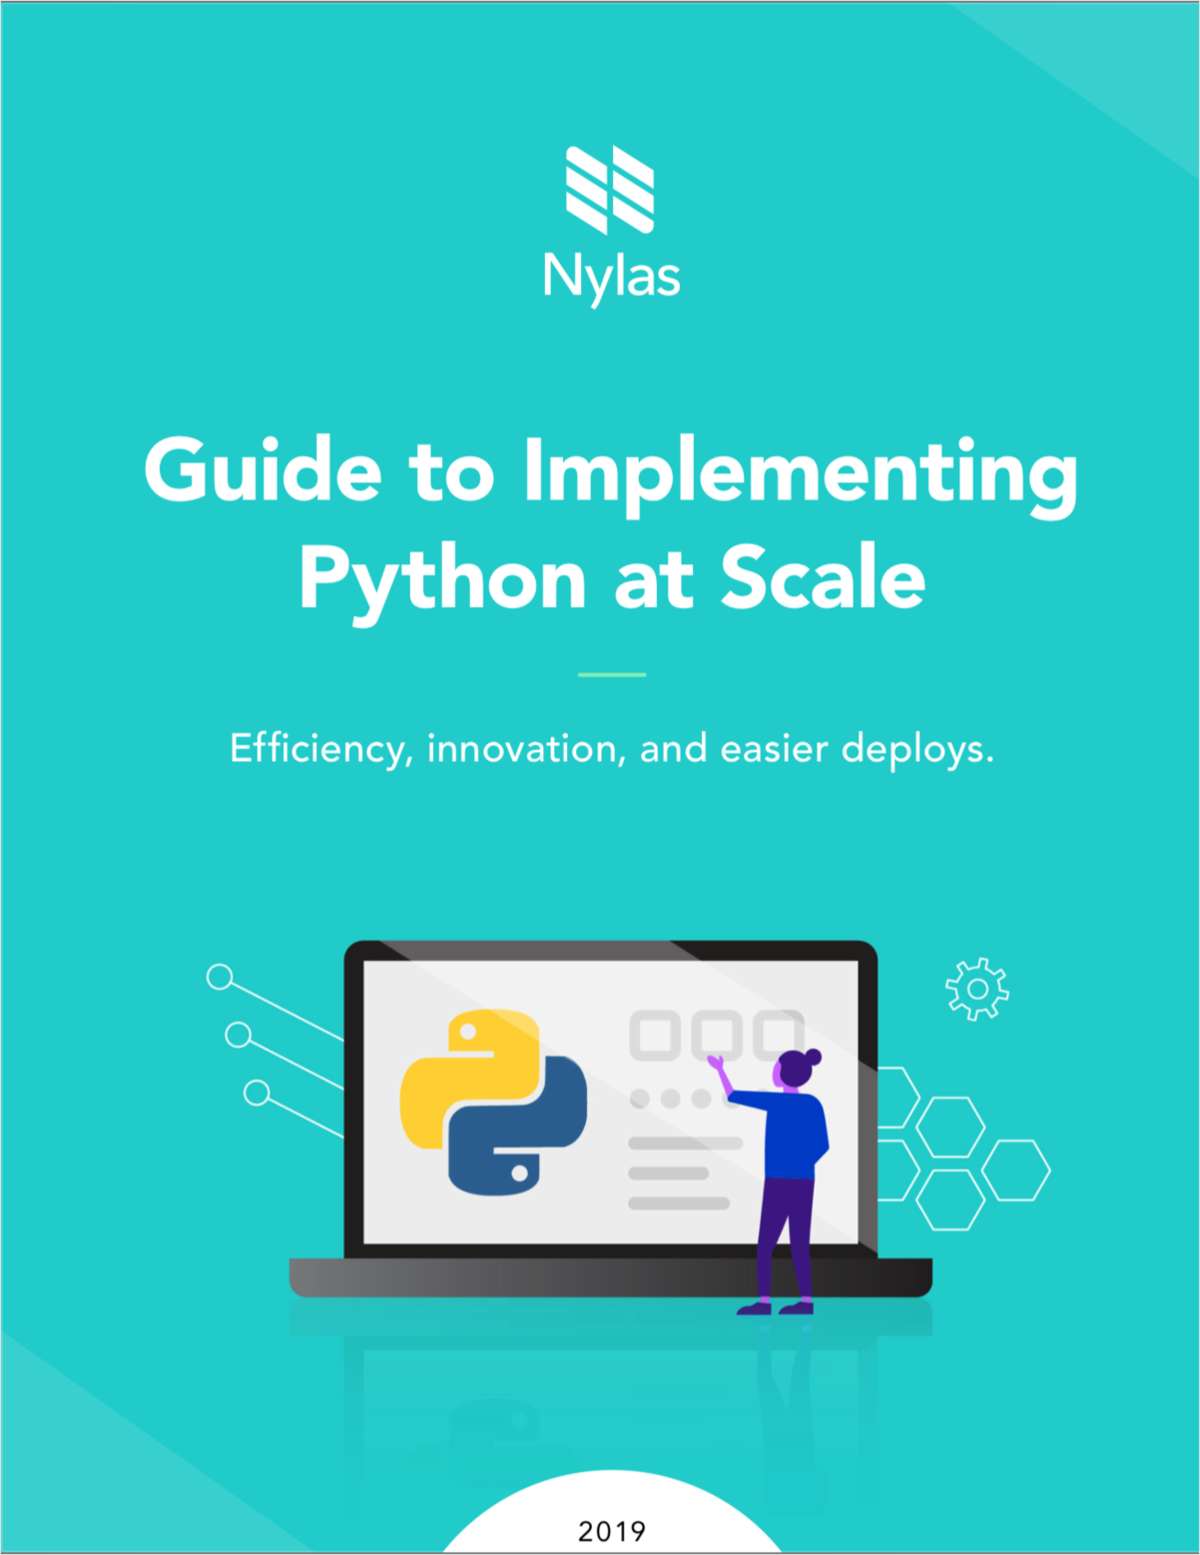 Guide to Implementing Python at Scale